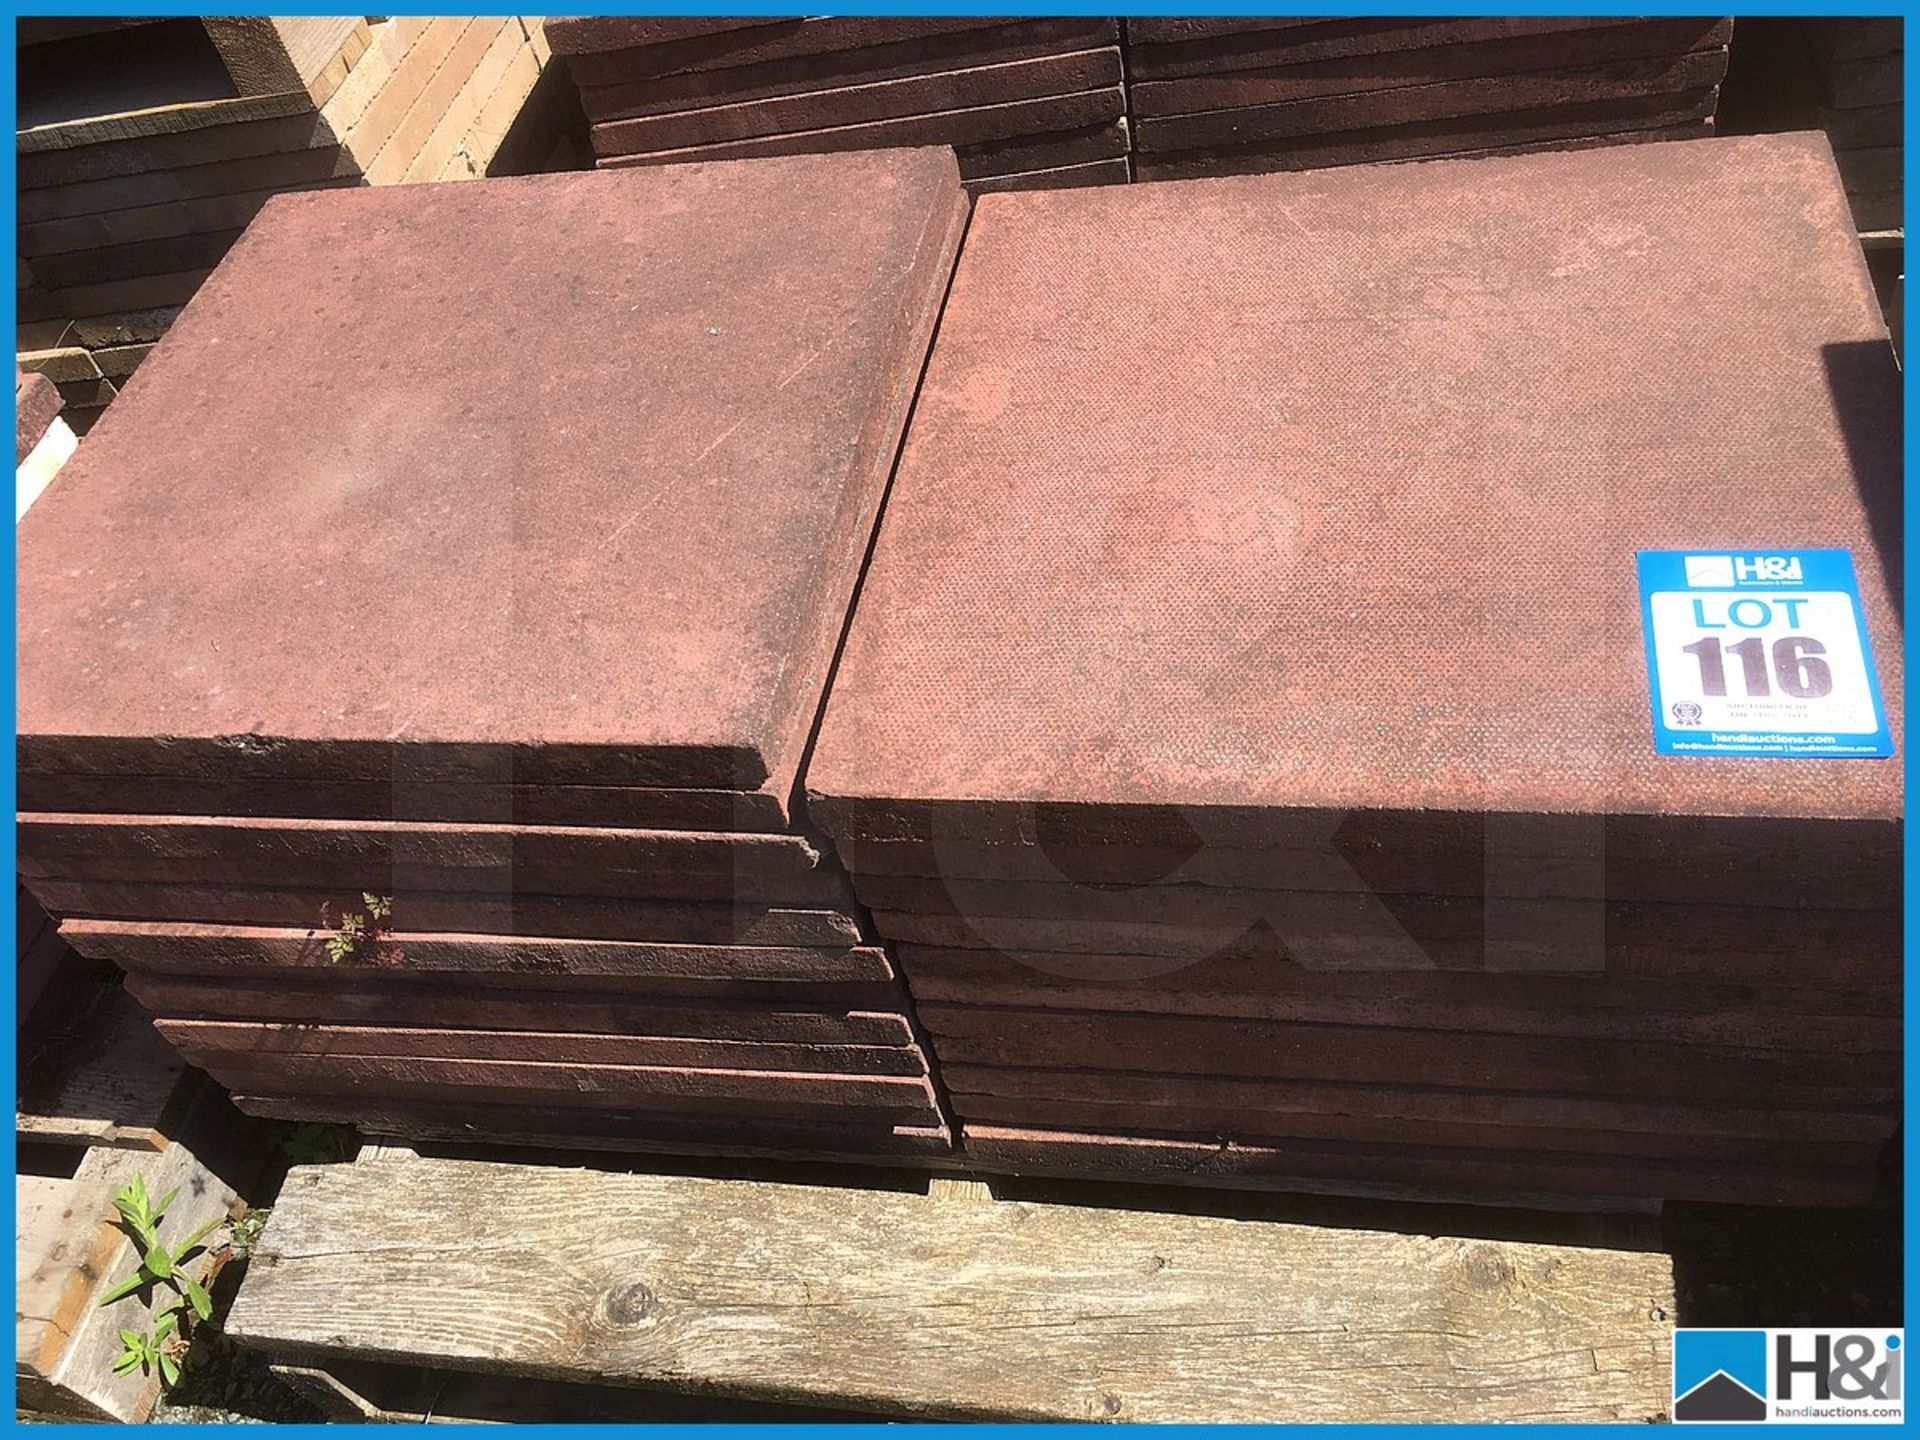 Approx 23 off 600 sq red paving slabs Appraisal: Viewing Essential Serial No: NA Location: